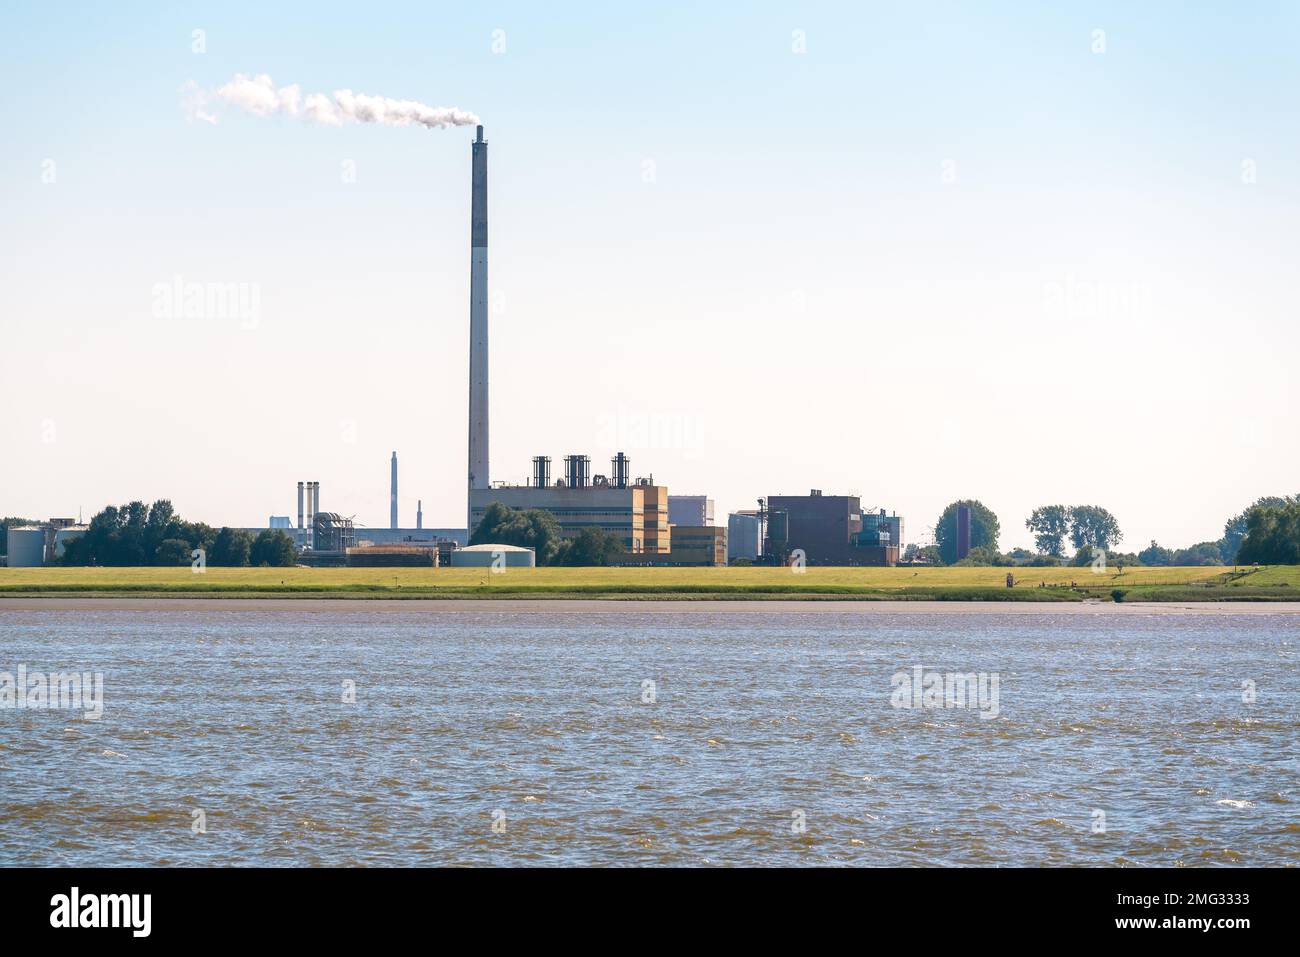 Chemical plant with a tall smokestack belching out white smoke on the bank of a river on a clear summer day Stock Photo